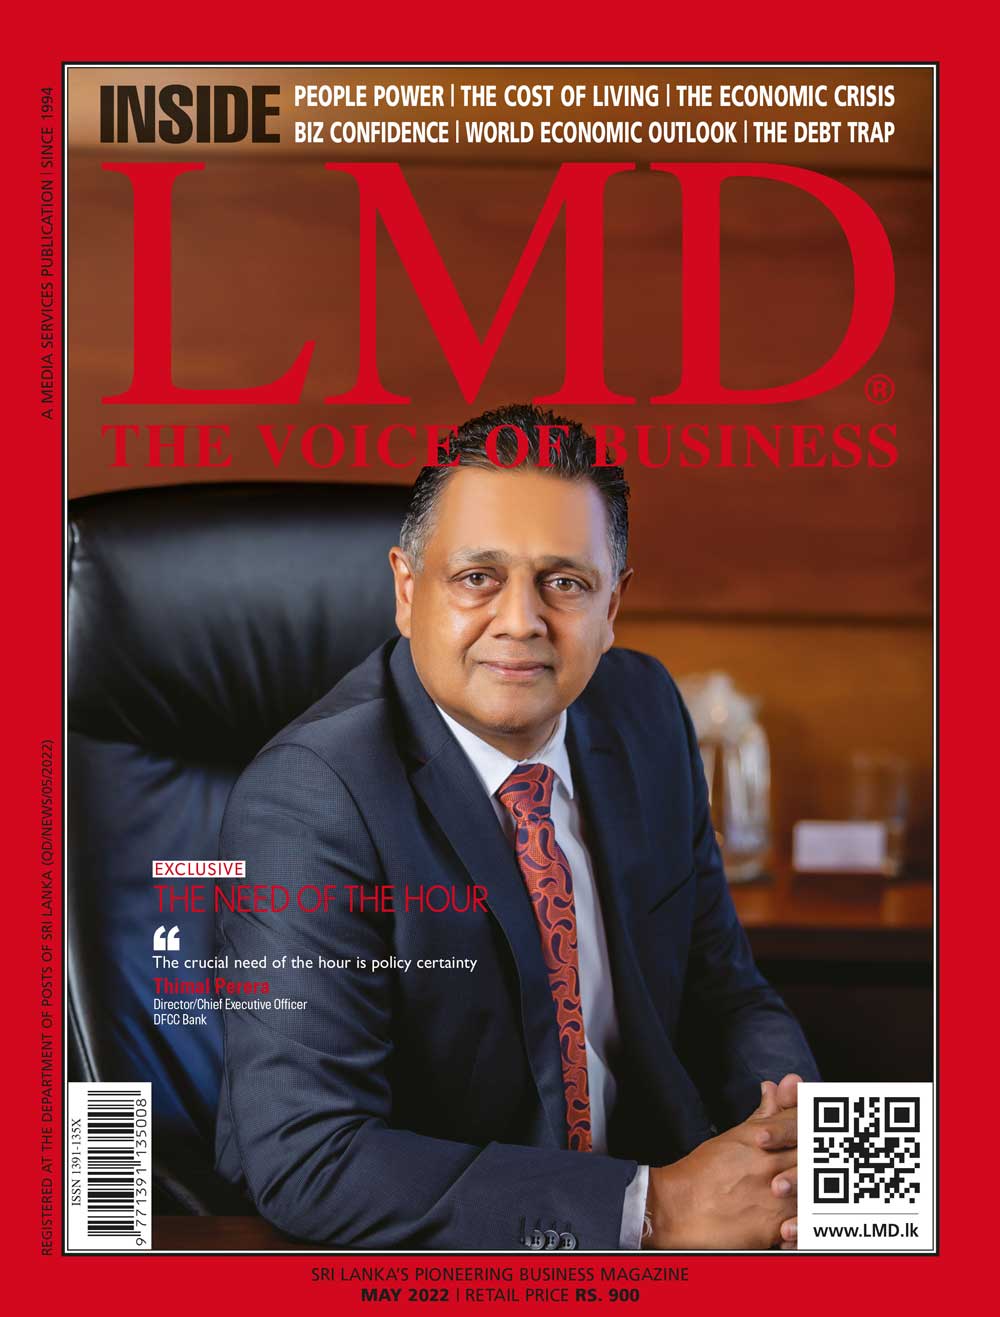 FB-LMD-MAY-COVERS